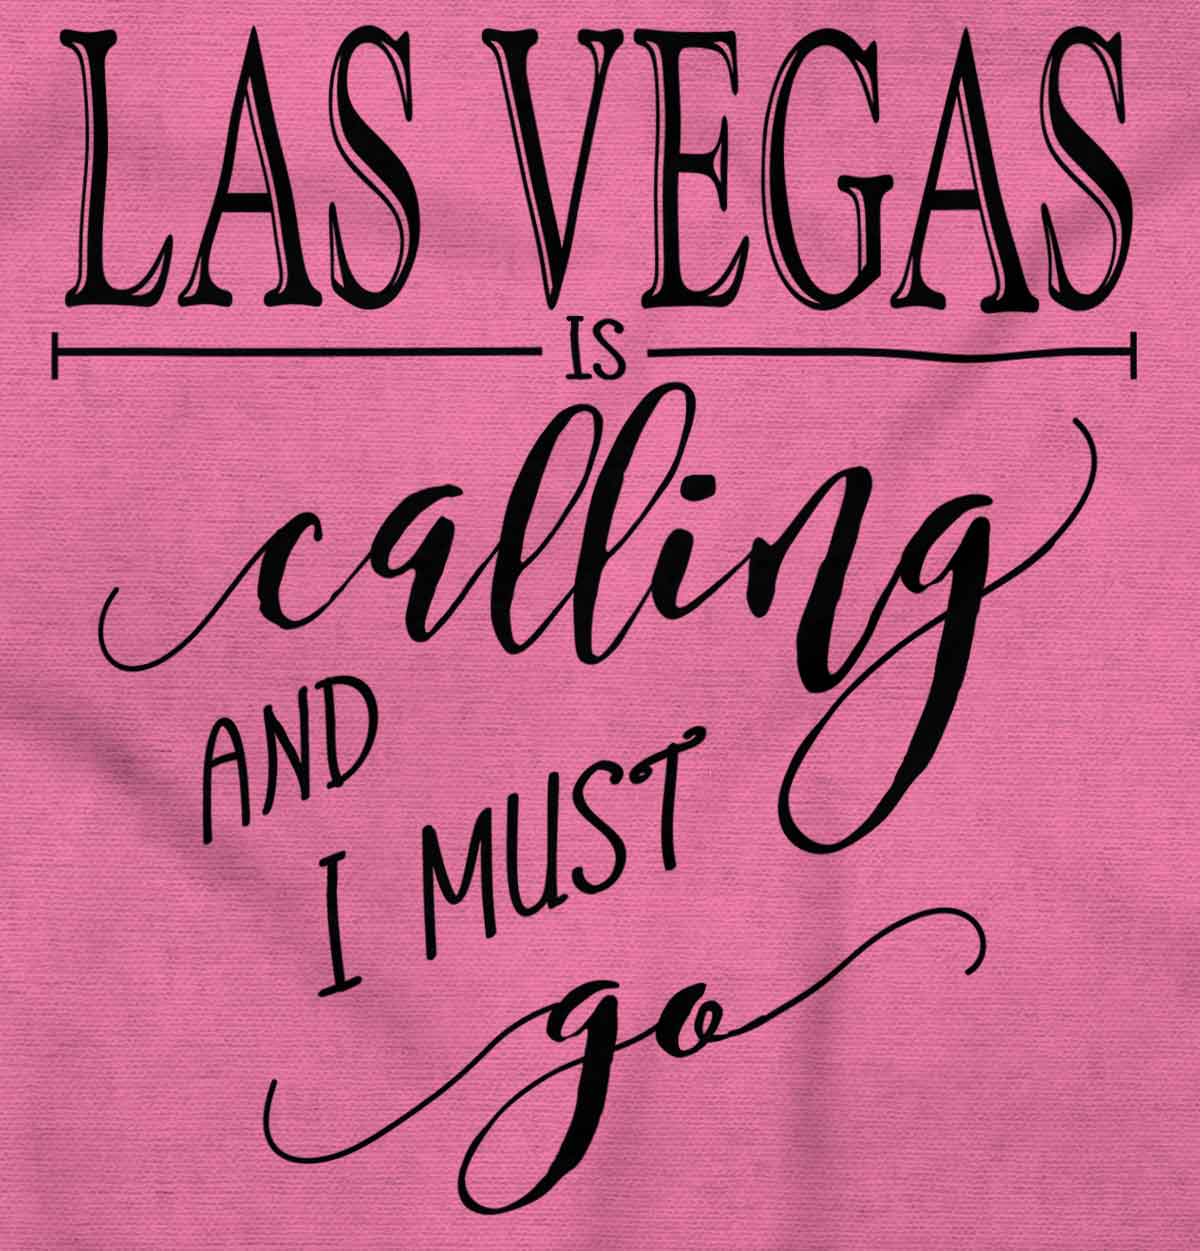 Las Vegas is Calling I Must Go Women's Graphic T Shirt Tees Brisco Brands M - image 2 of 6